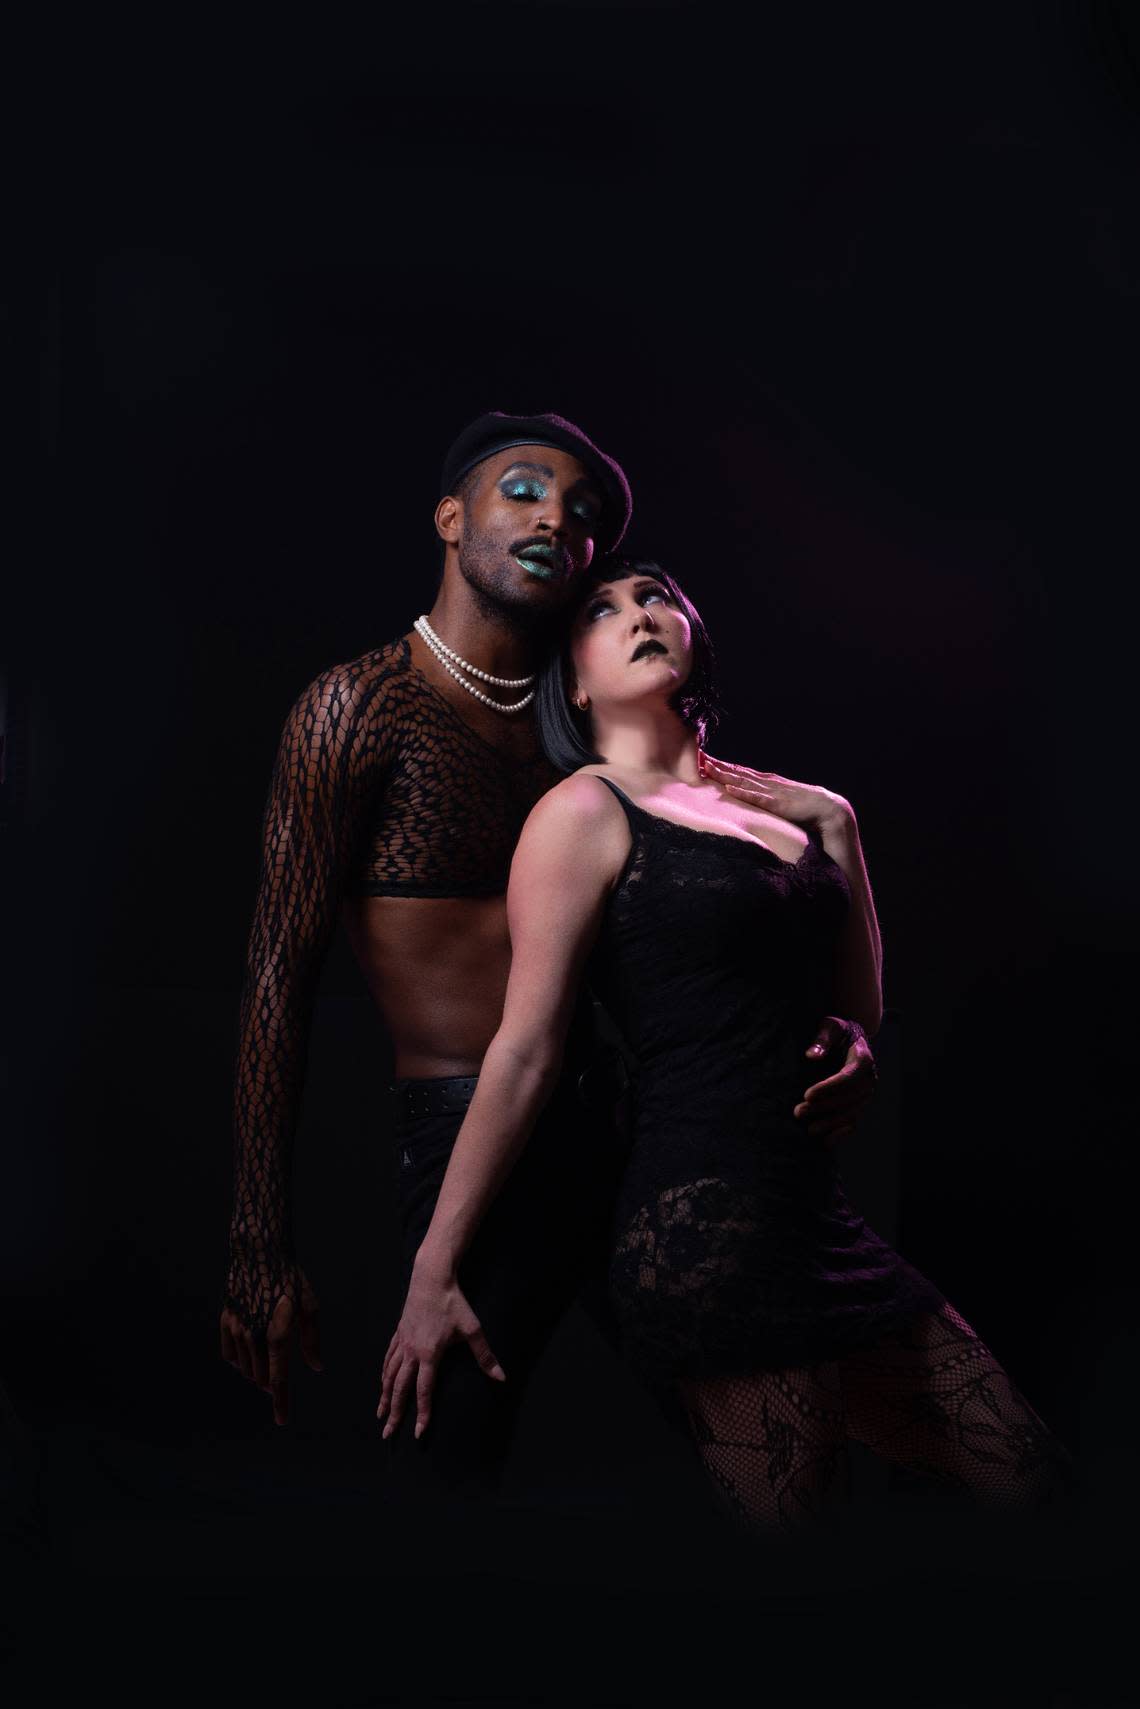 Elijah Word is the Emcee and Lindsey Corey plays Sally Bowles in Zoetic Stage’s immersive “Cabaret” at the Arsht Center.